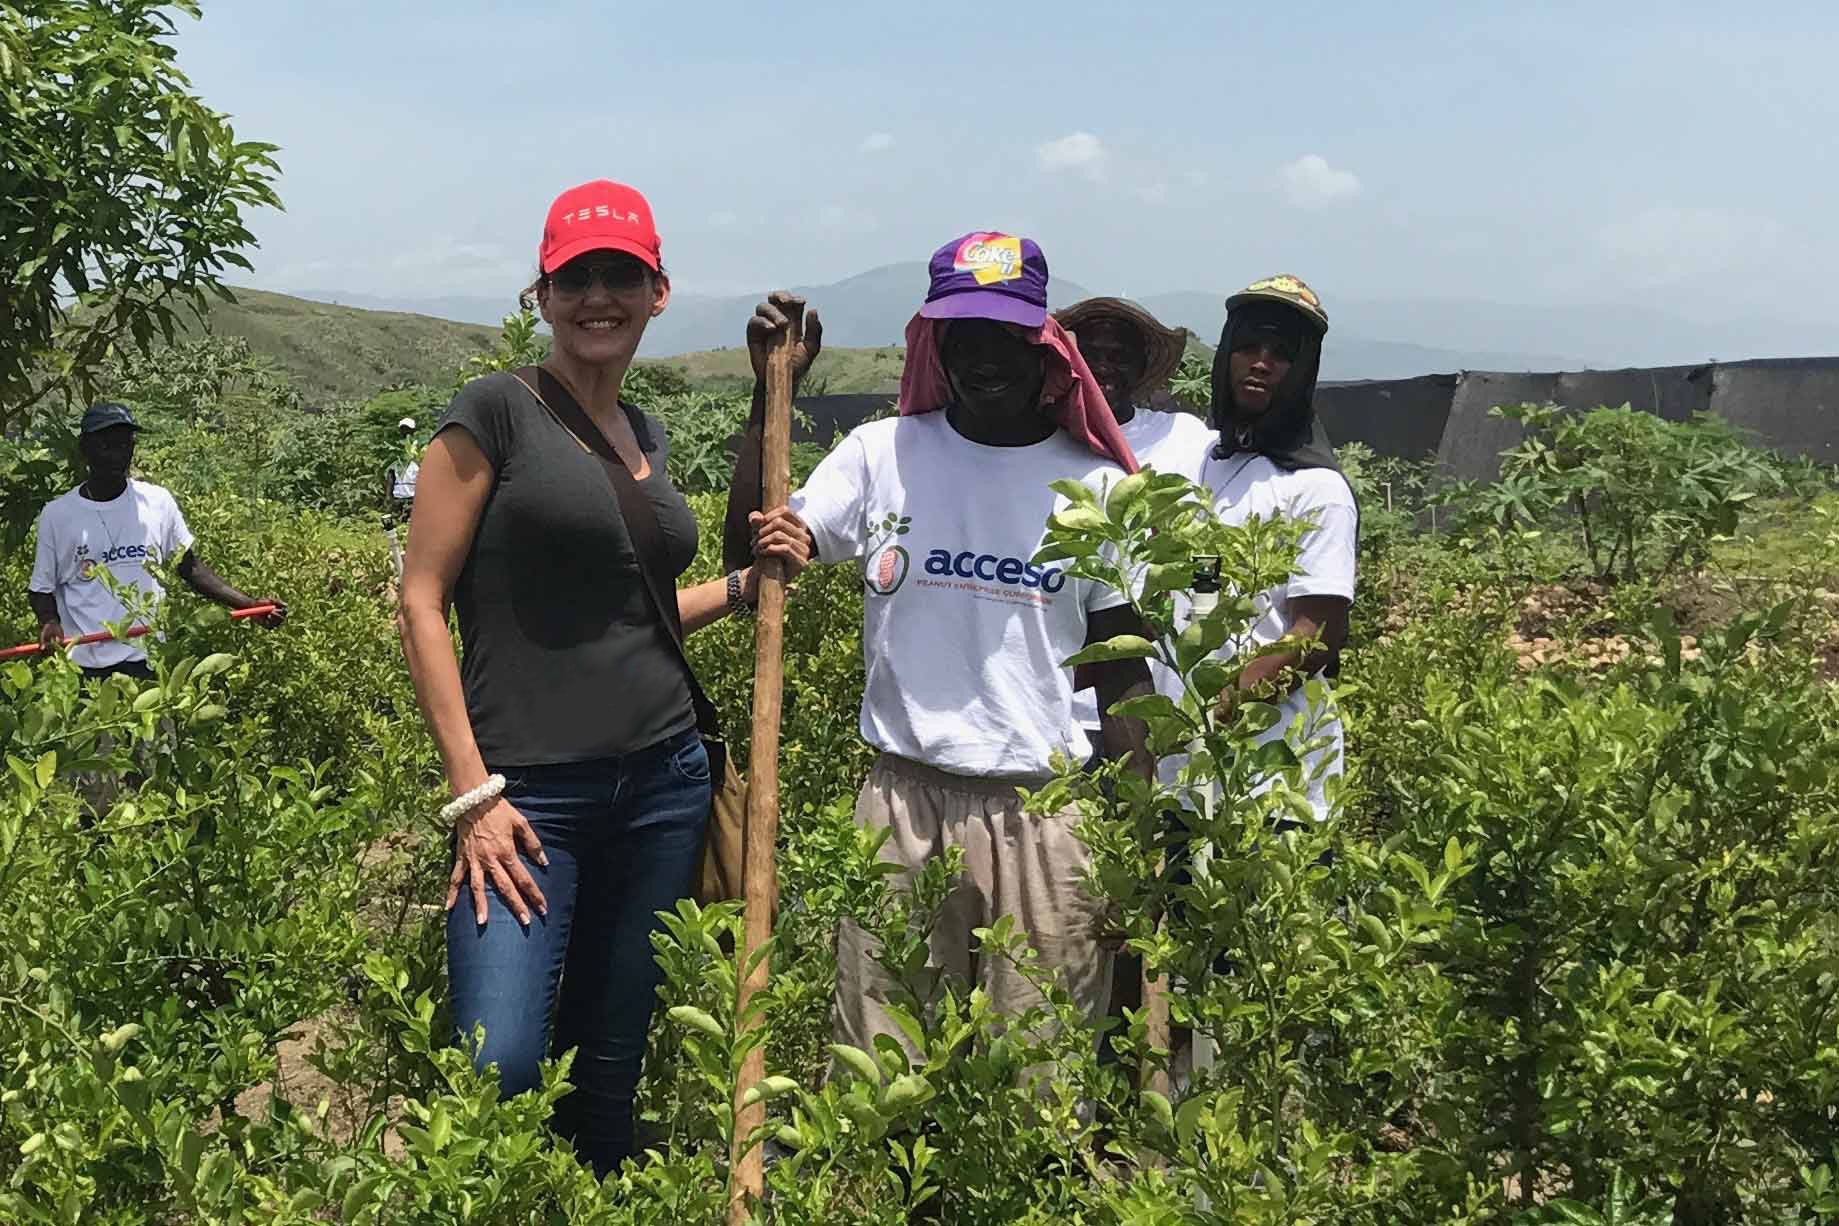 Workers of 7 Virtues, a clean fragrance brand, in a grassland in Haiti.